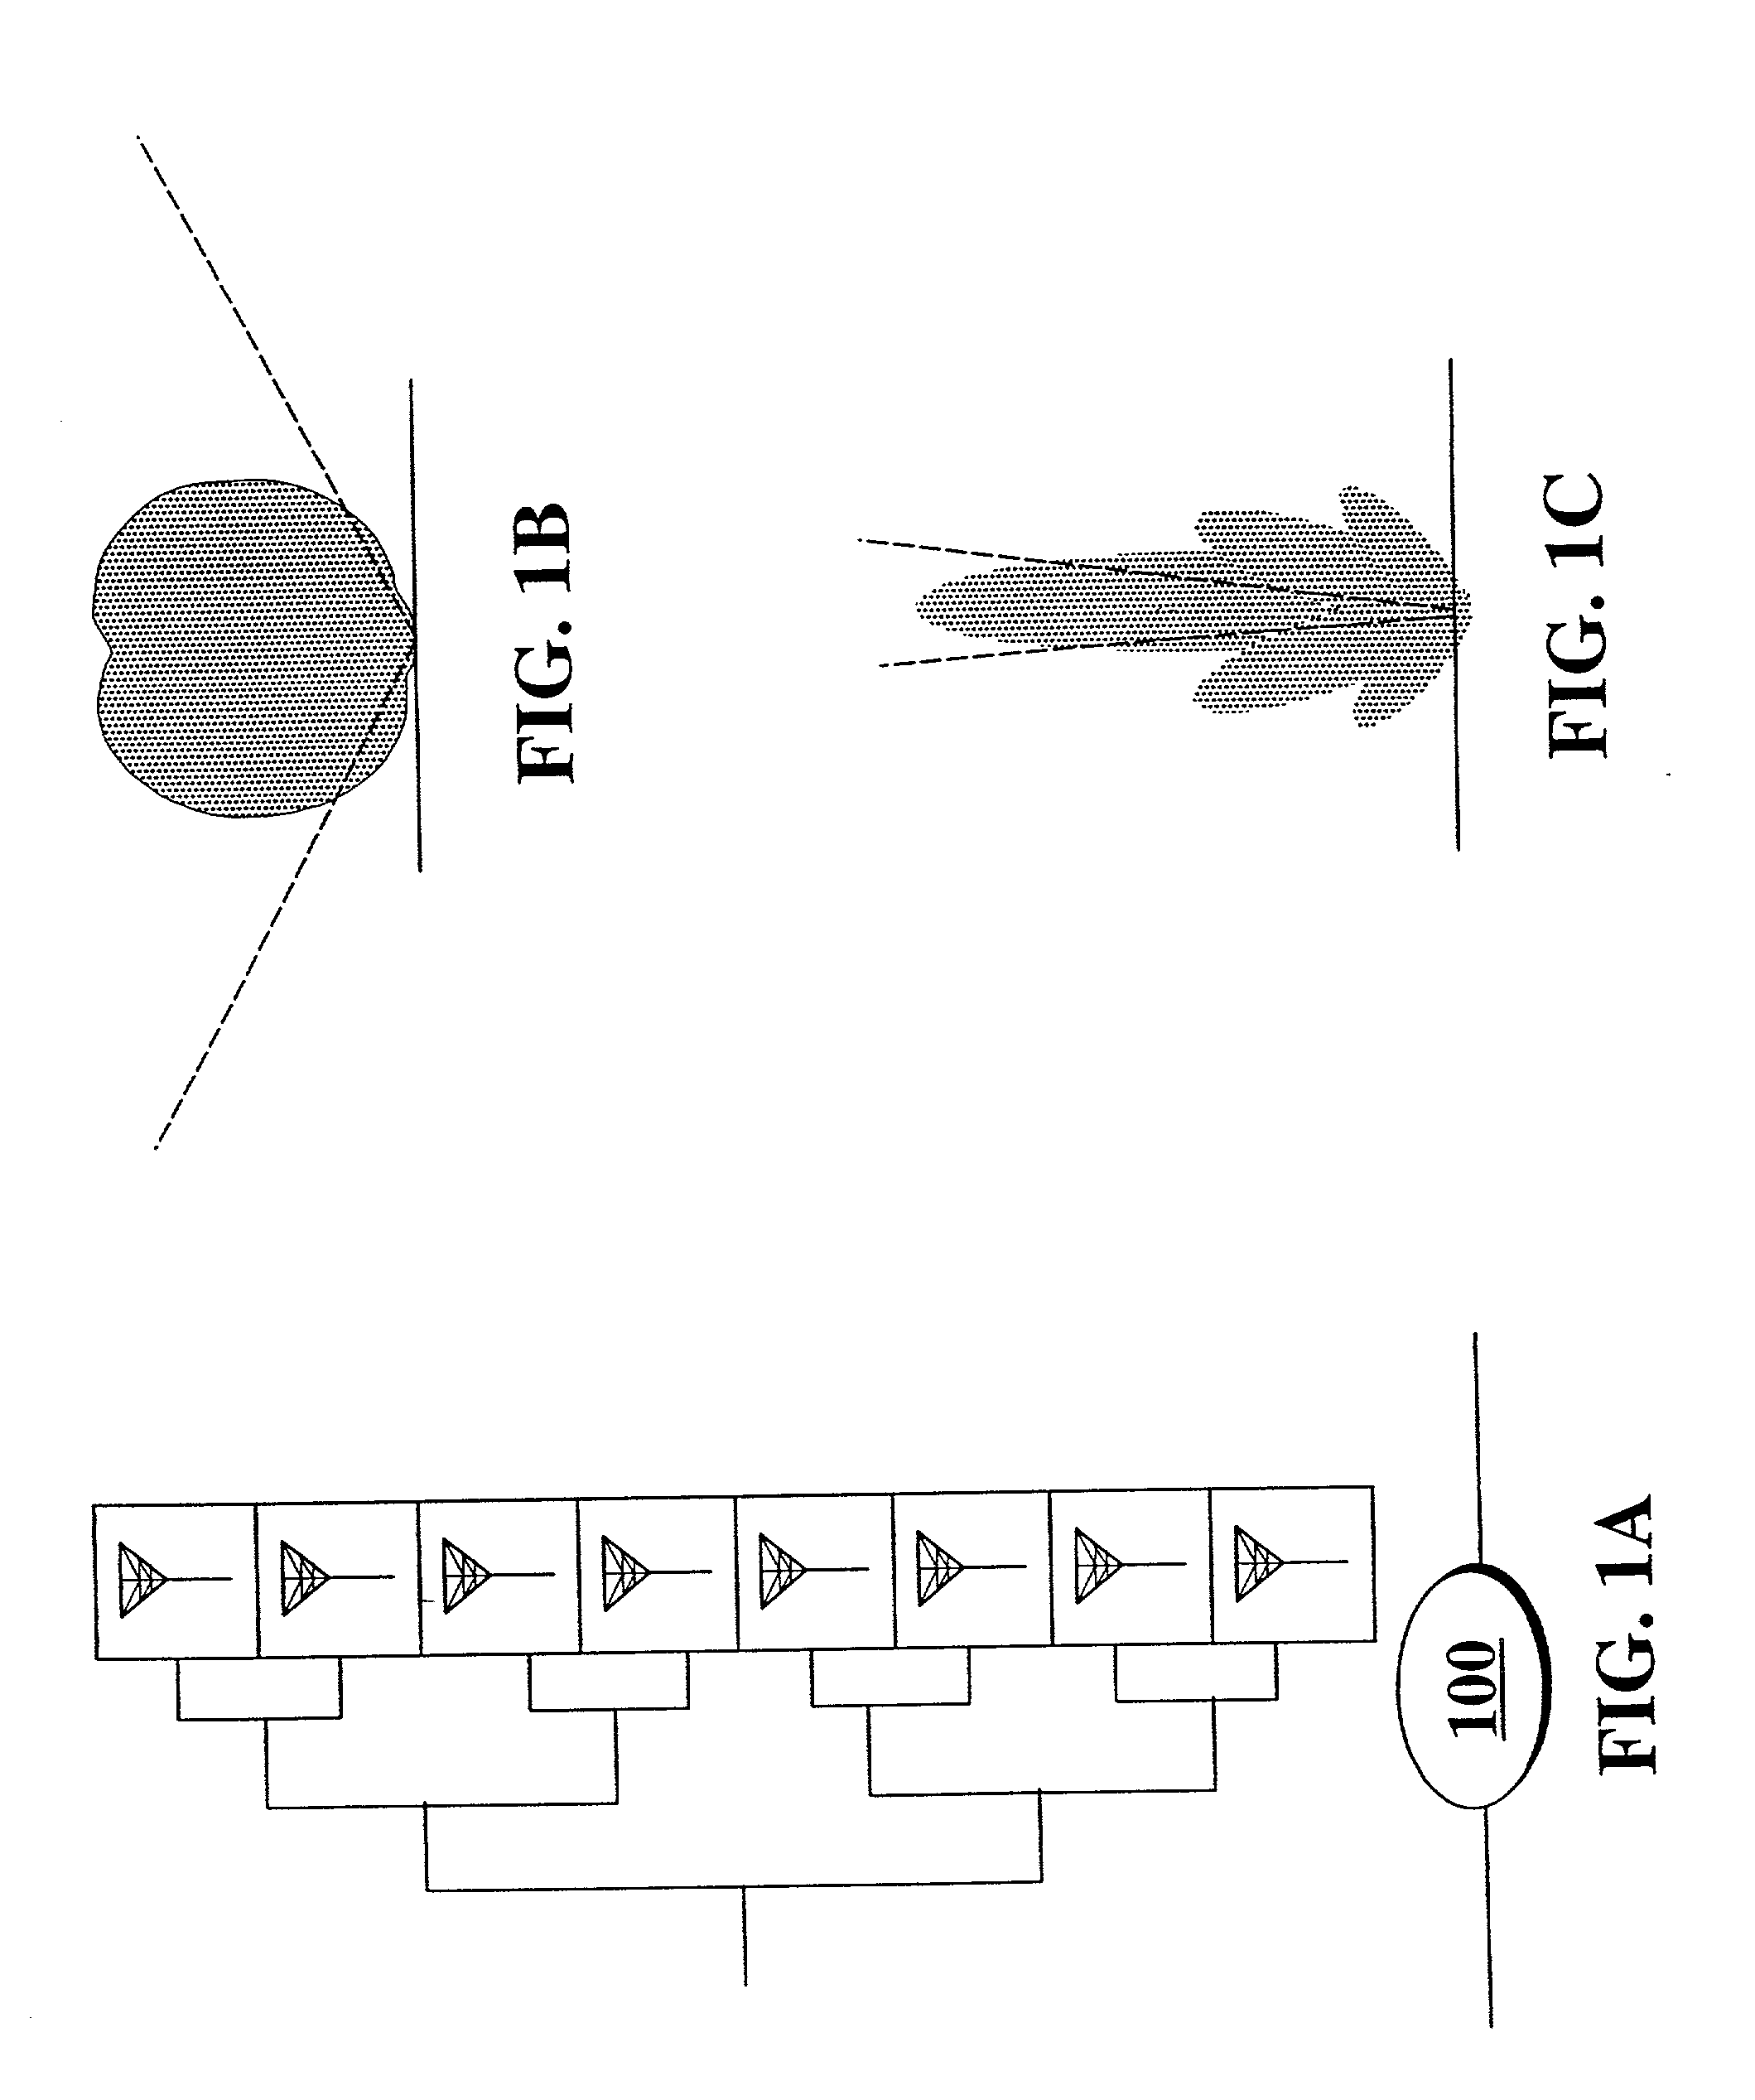 Active antenna array configuration and control for cellular communication systems